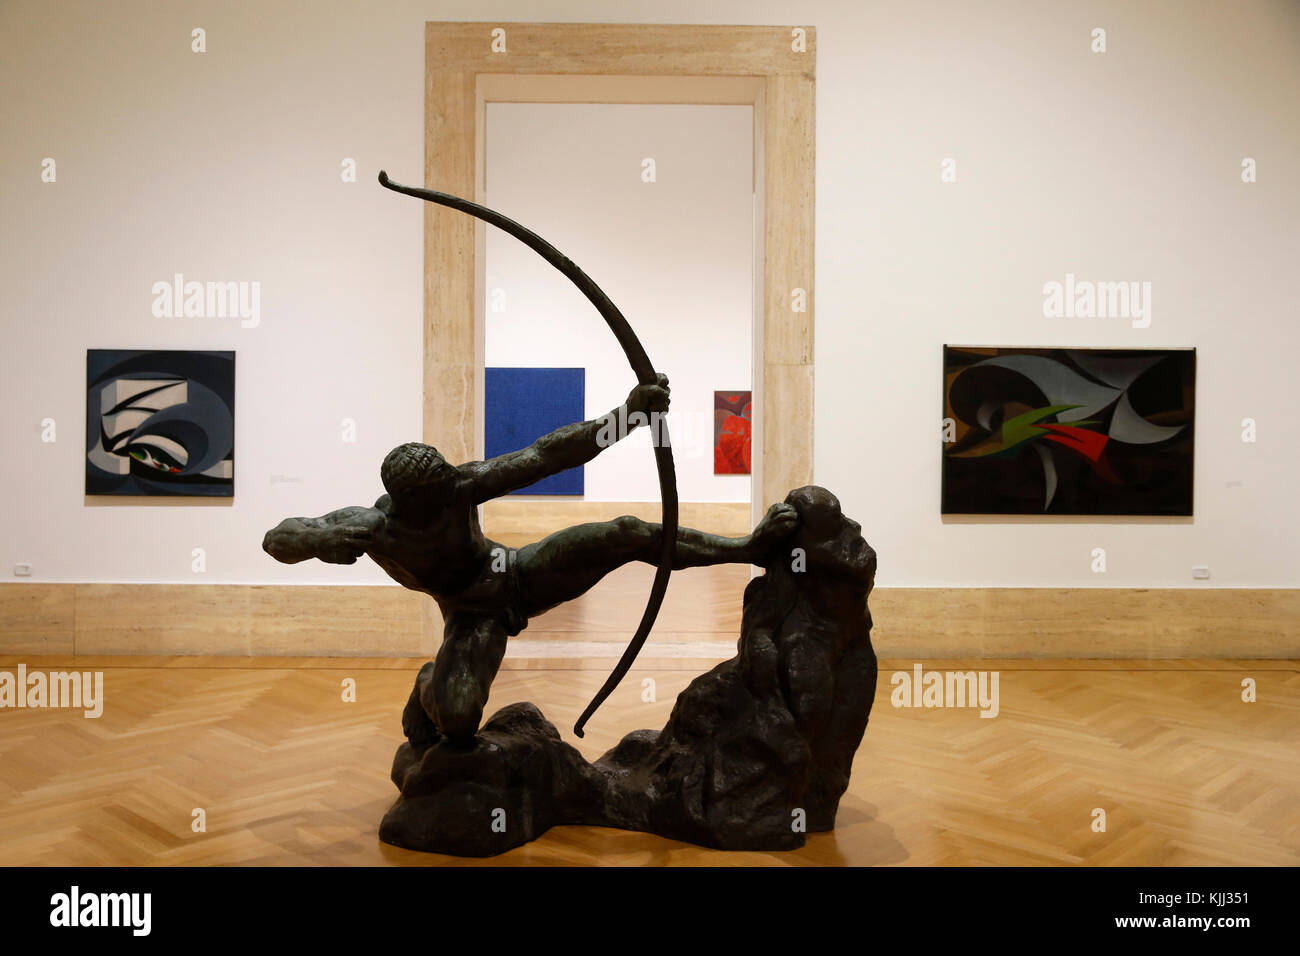 Museum of Modern Art, Rome. Antoine Bourdelle archer statue, and paintings. Italy. Stock Photo